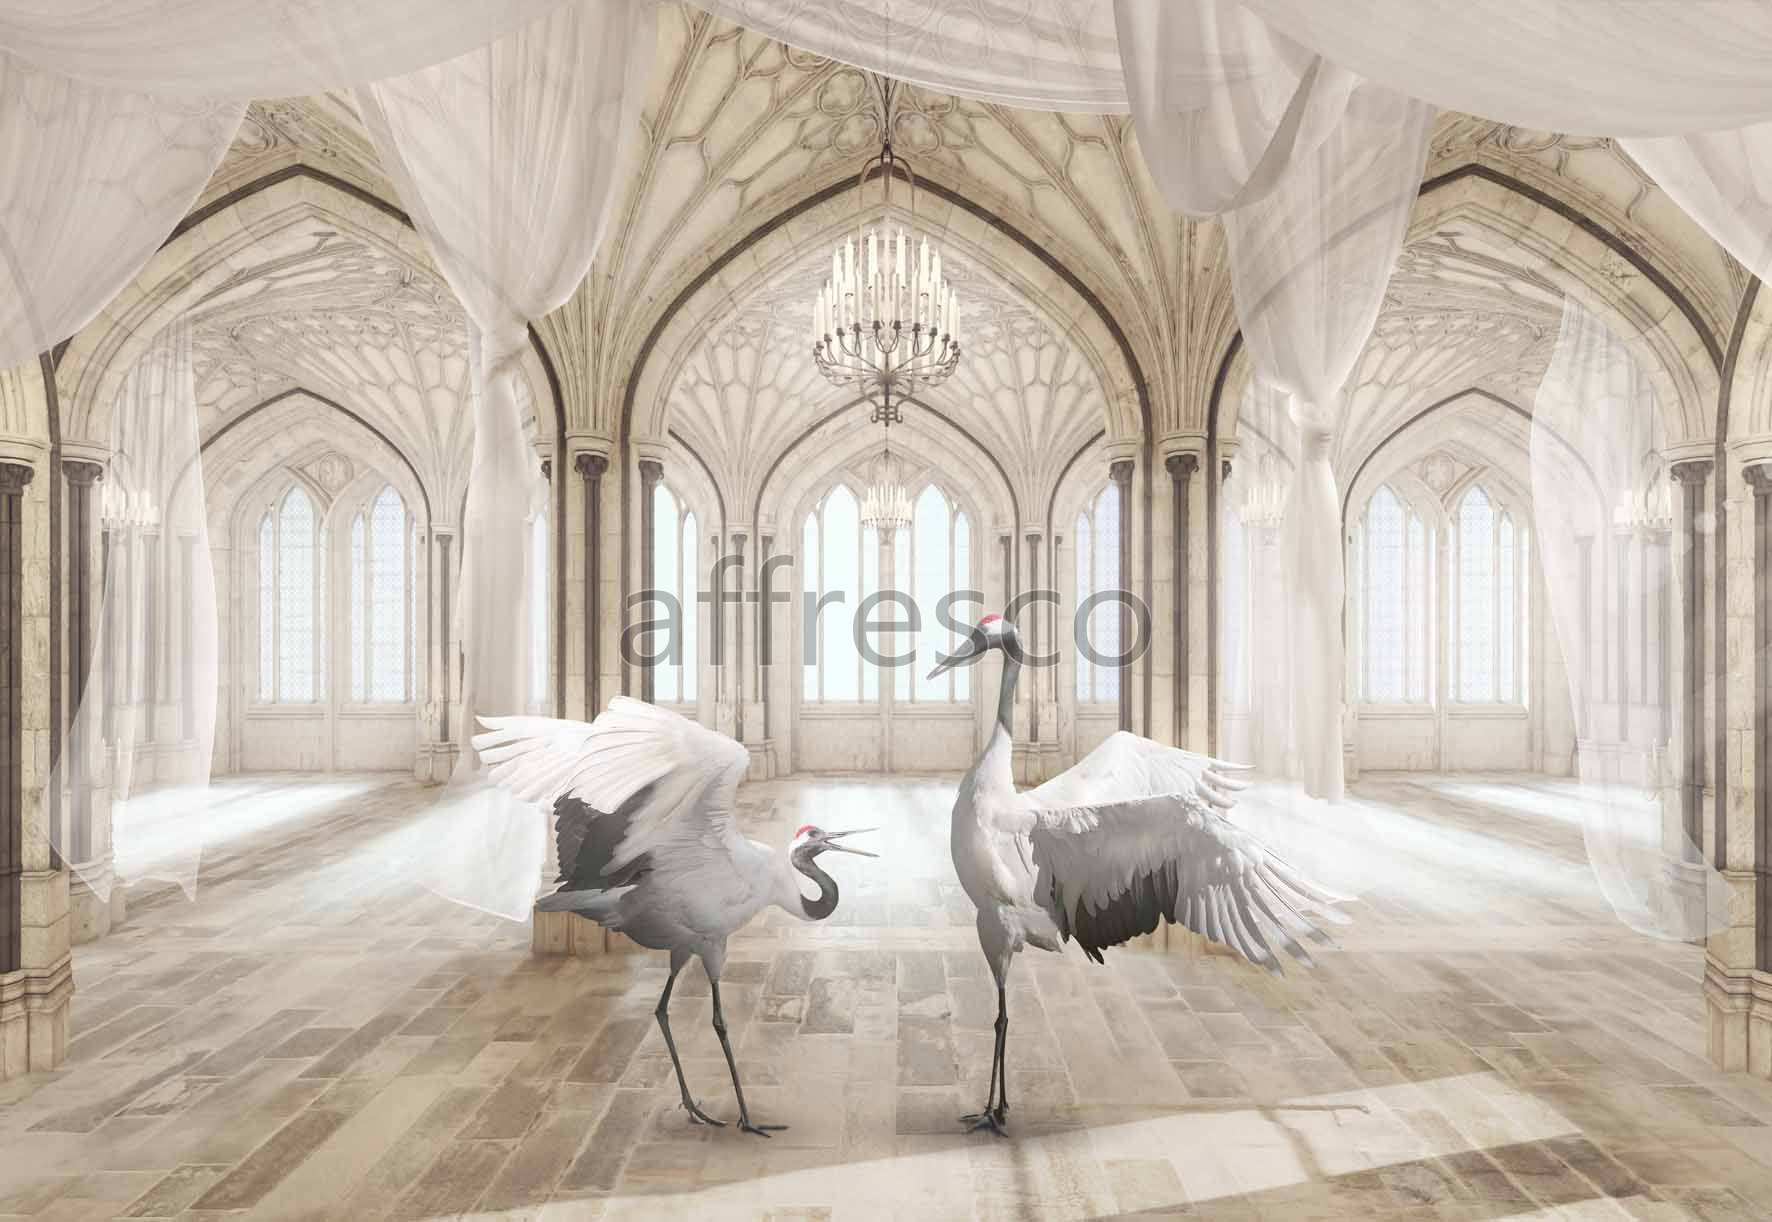 ID135933 | The best landscapes | Cranes in the castle | Affresco Factory